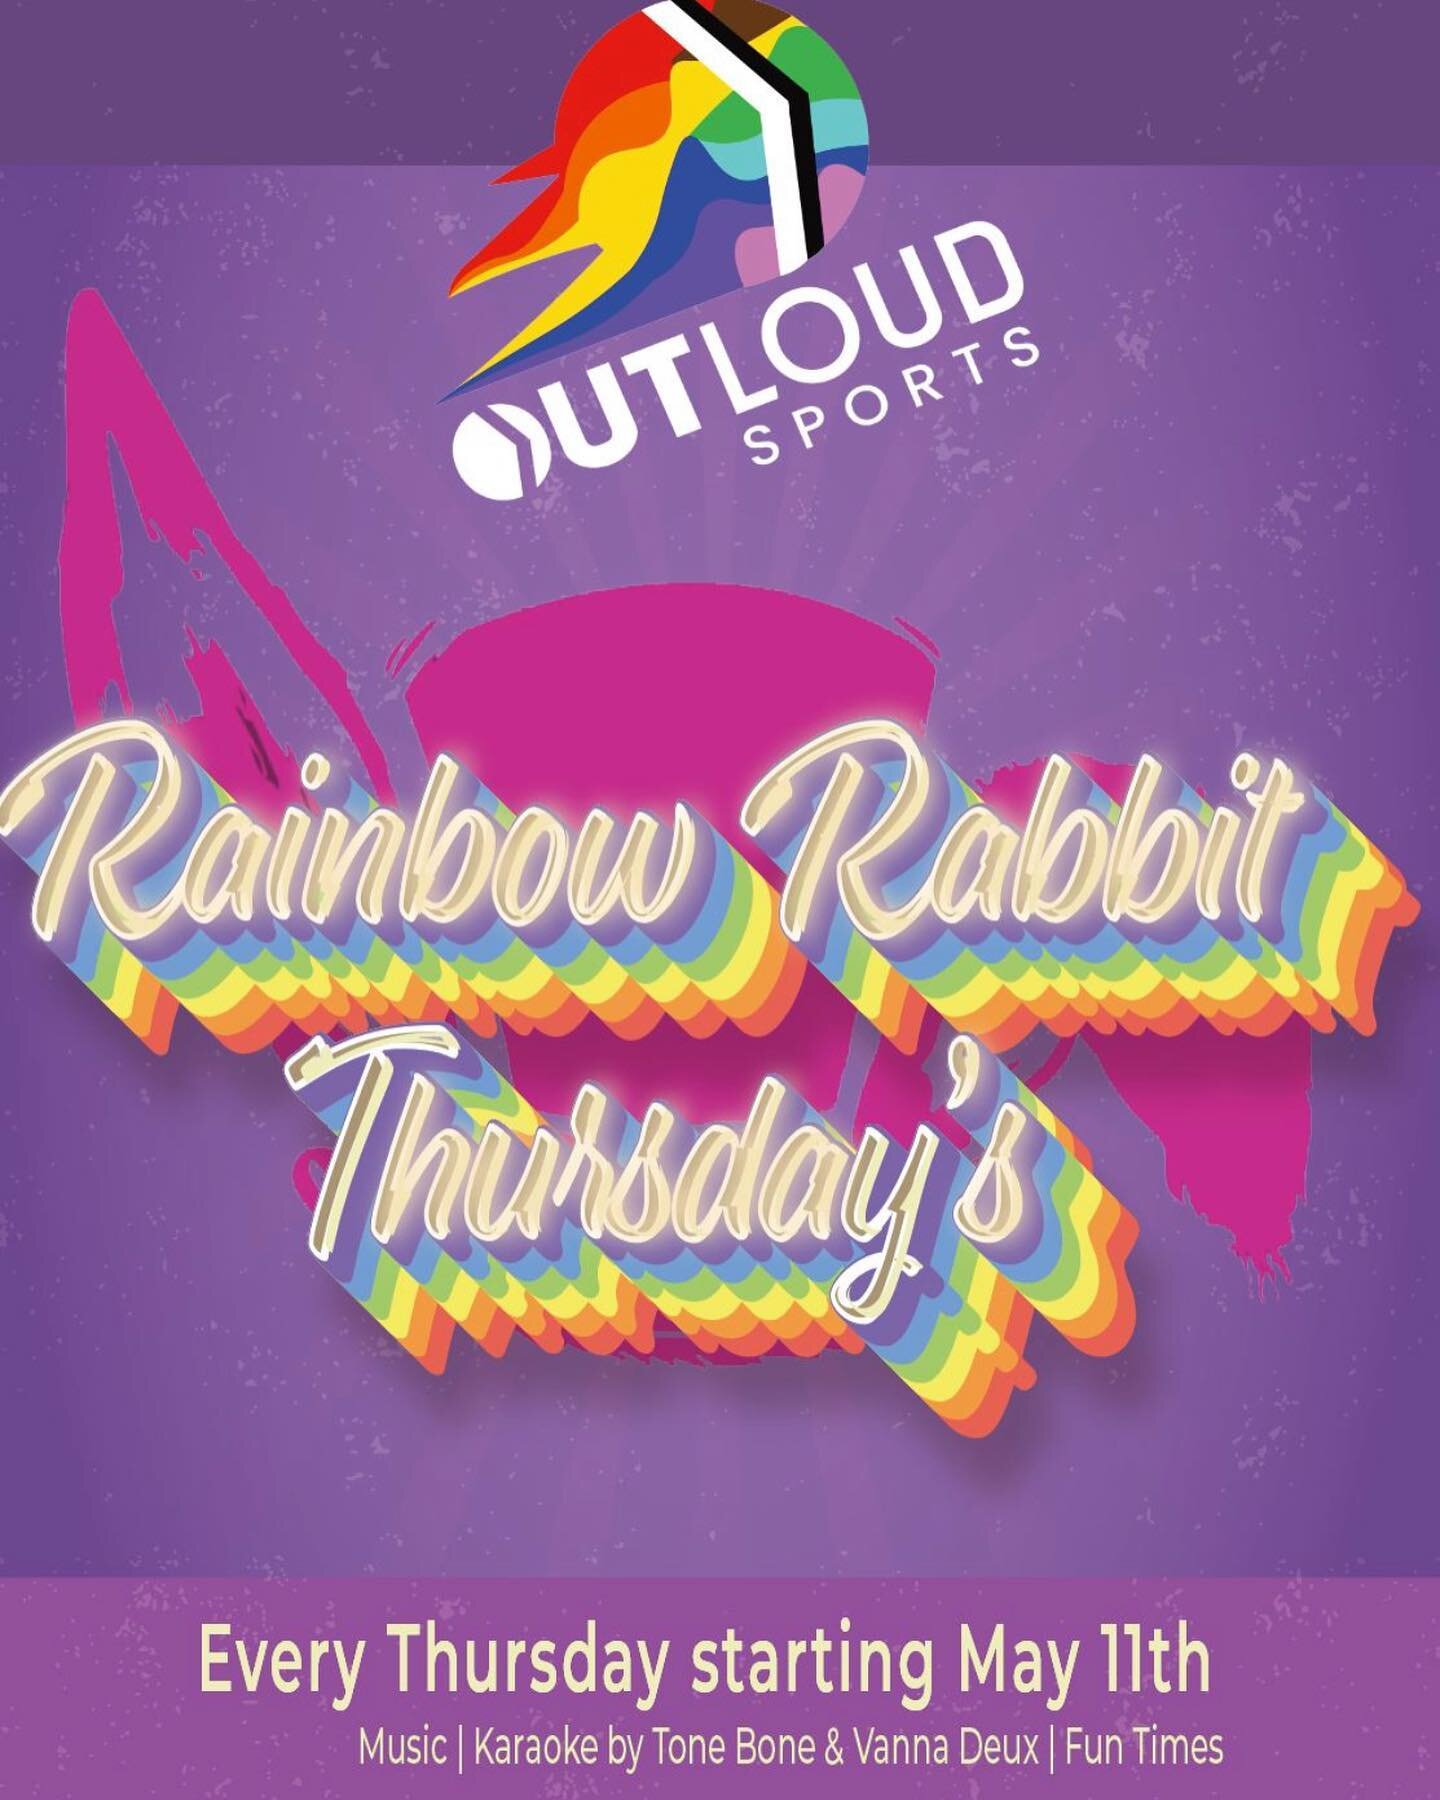 Rainbow Rabbit Thursday&rsquo;s returns May 11th at Jack Rabbit! Karaoke with @vannadeux! All are welcome! Bring your dolla bills!